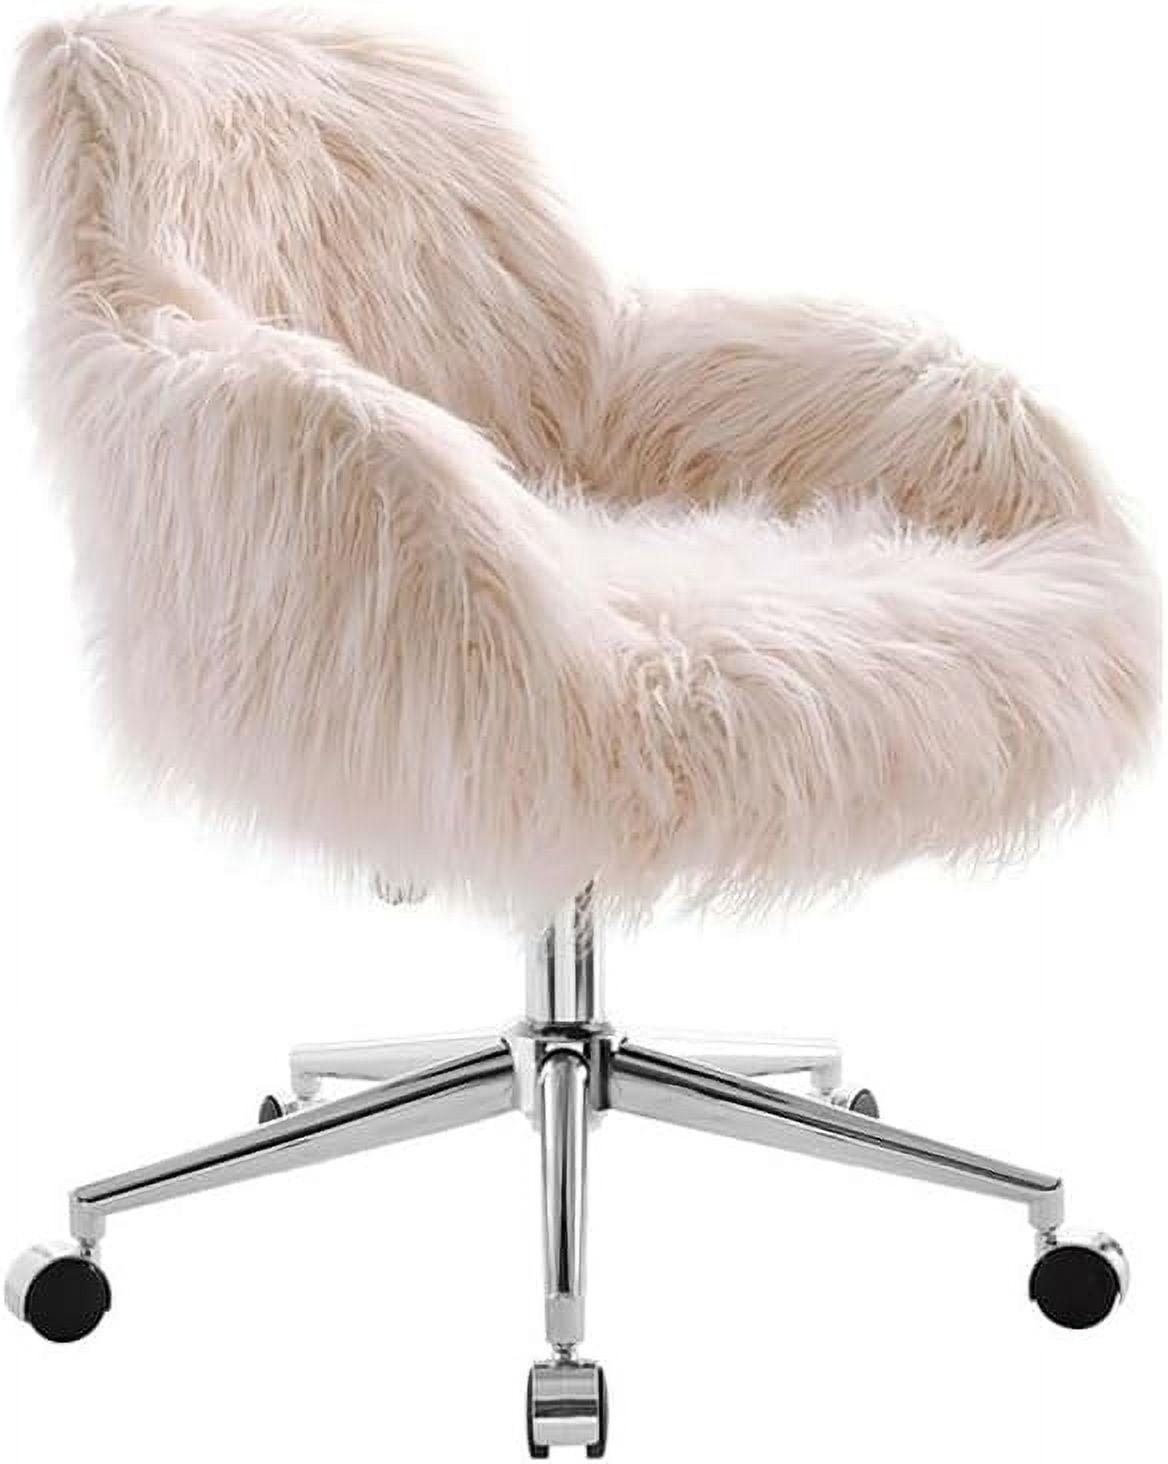 Fiona Glam Pink Faux Fur & Chrome Swivel Office Chair